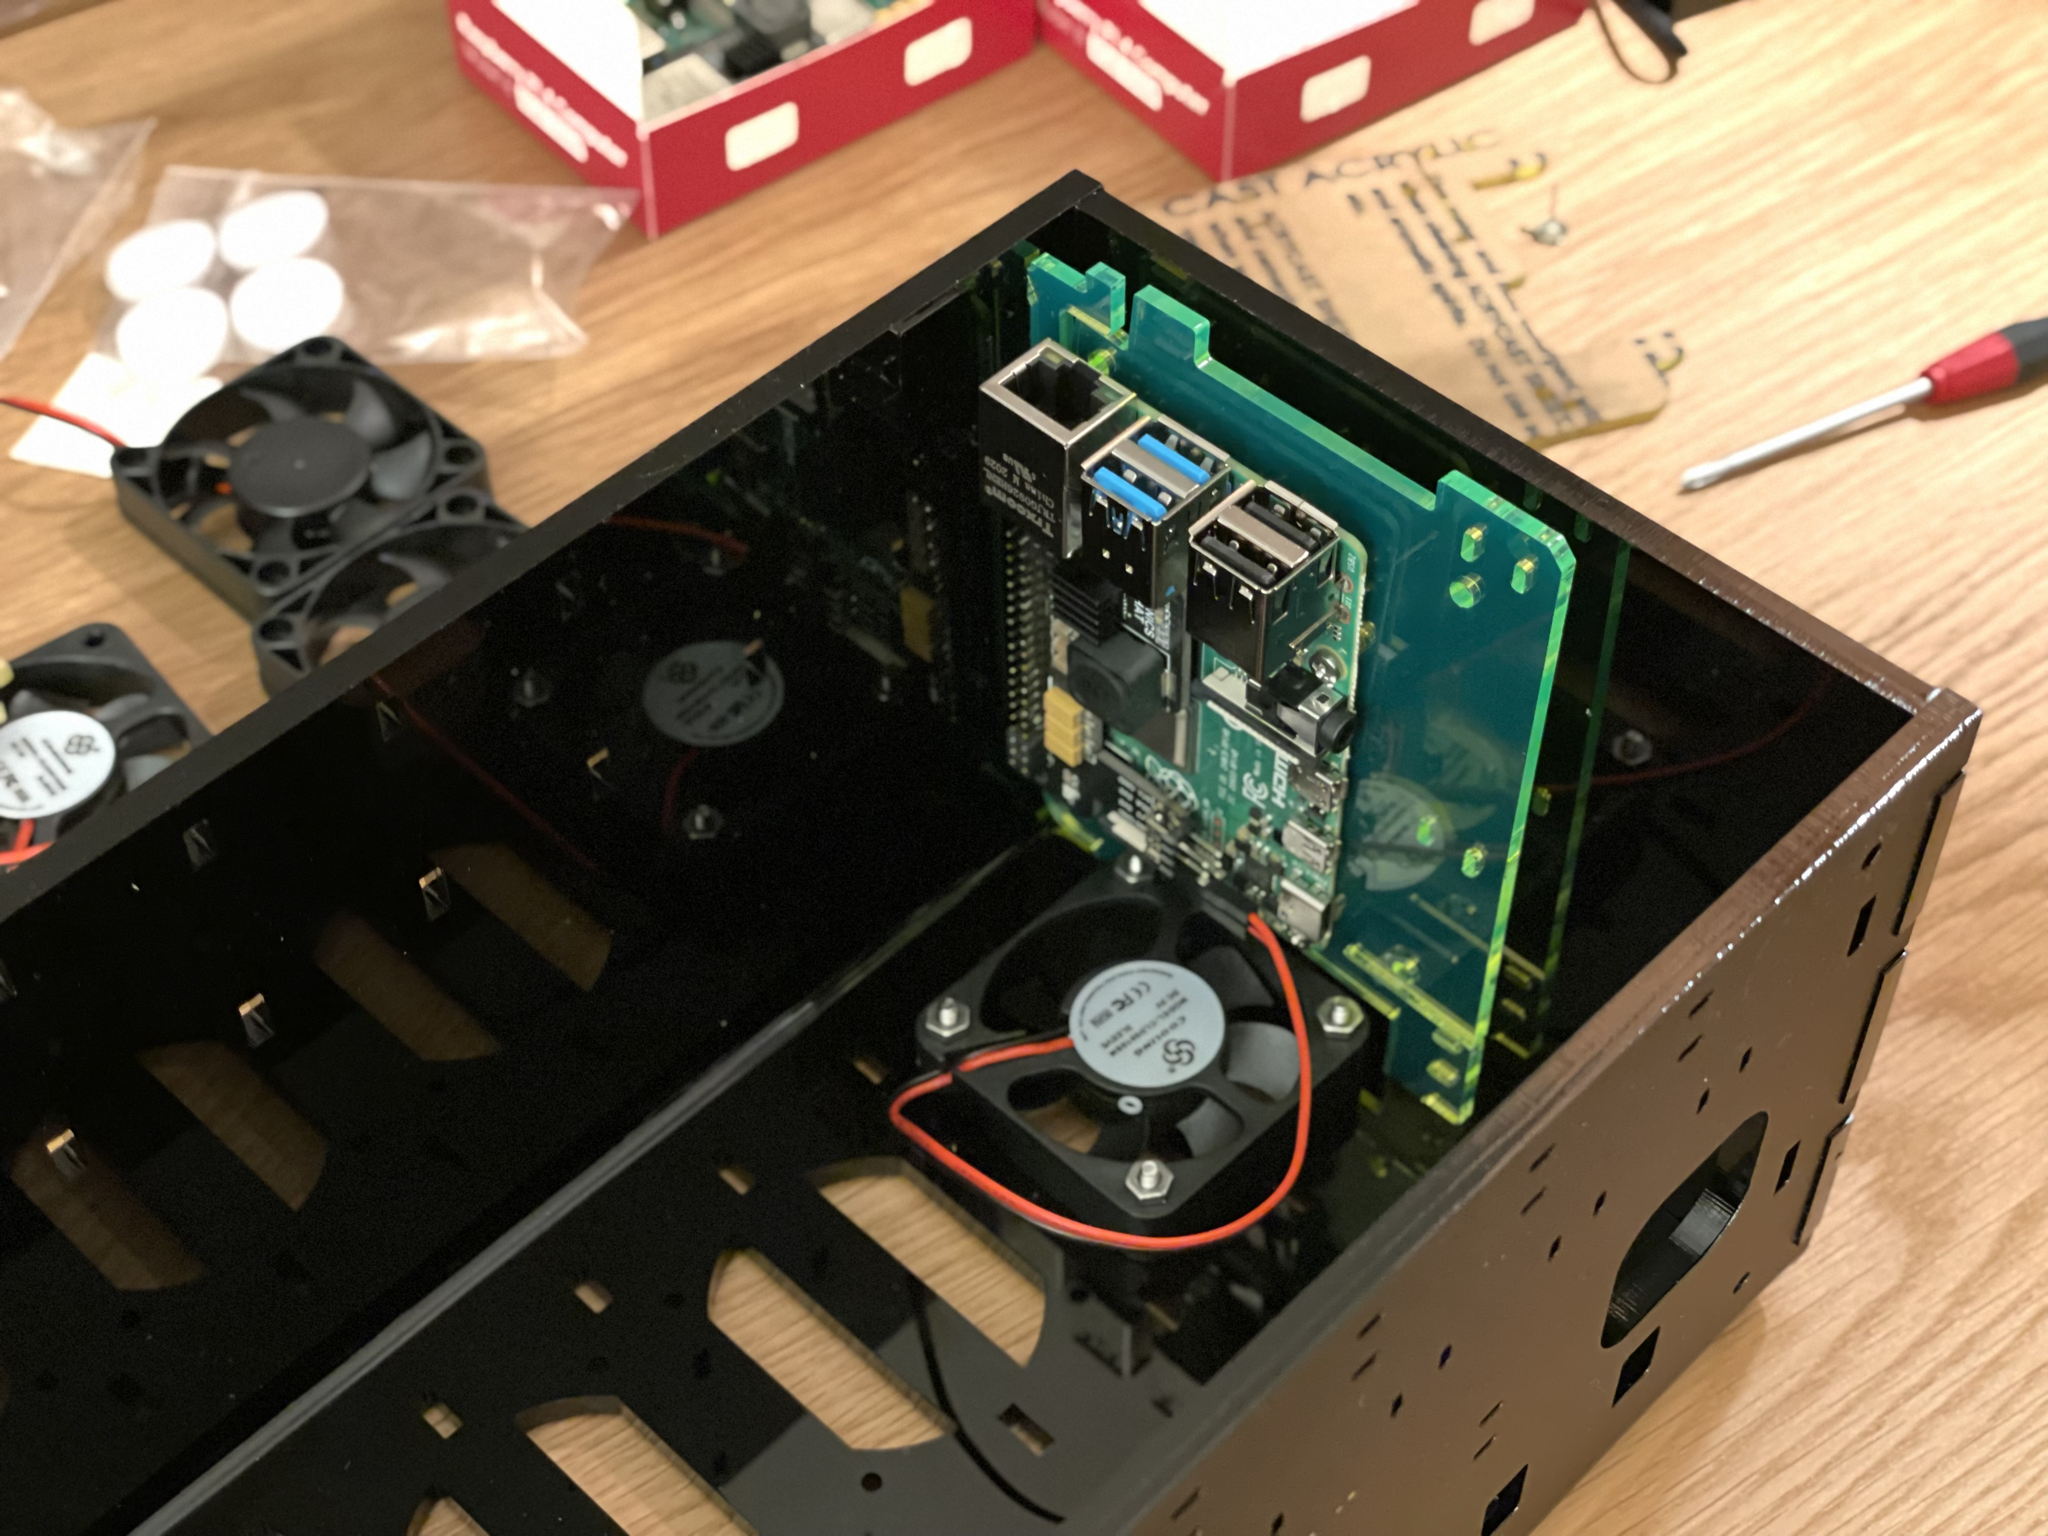 Attaching each Raspberry Pi to a cluster case slot